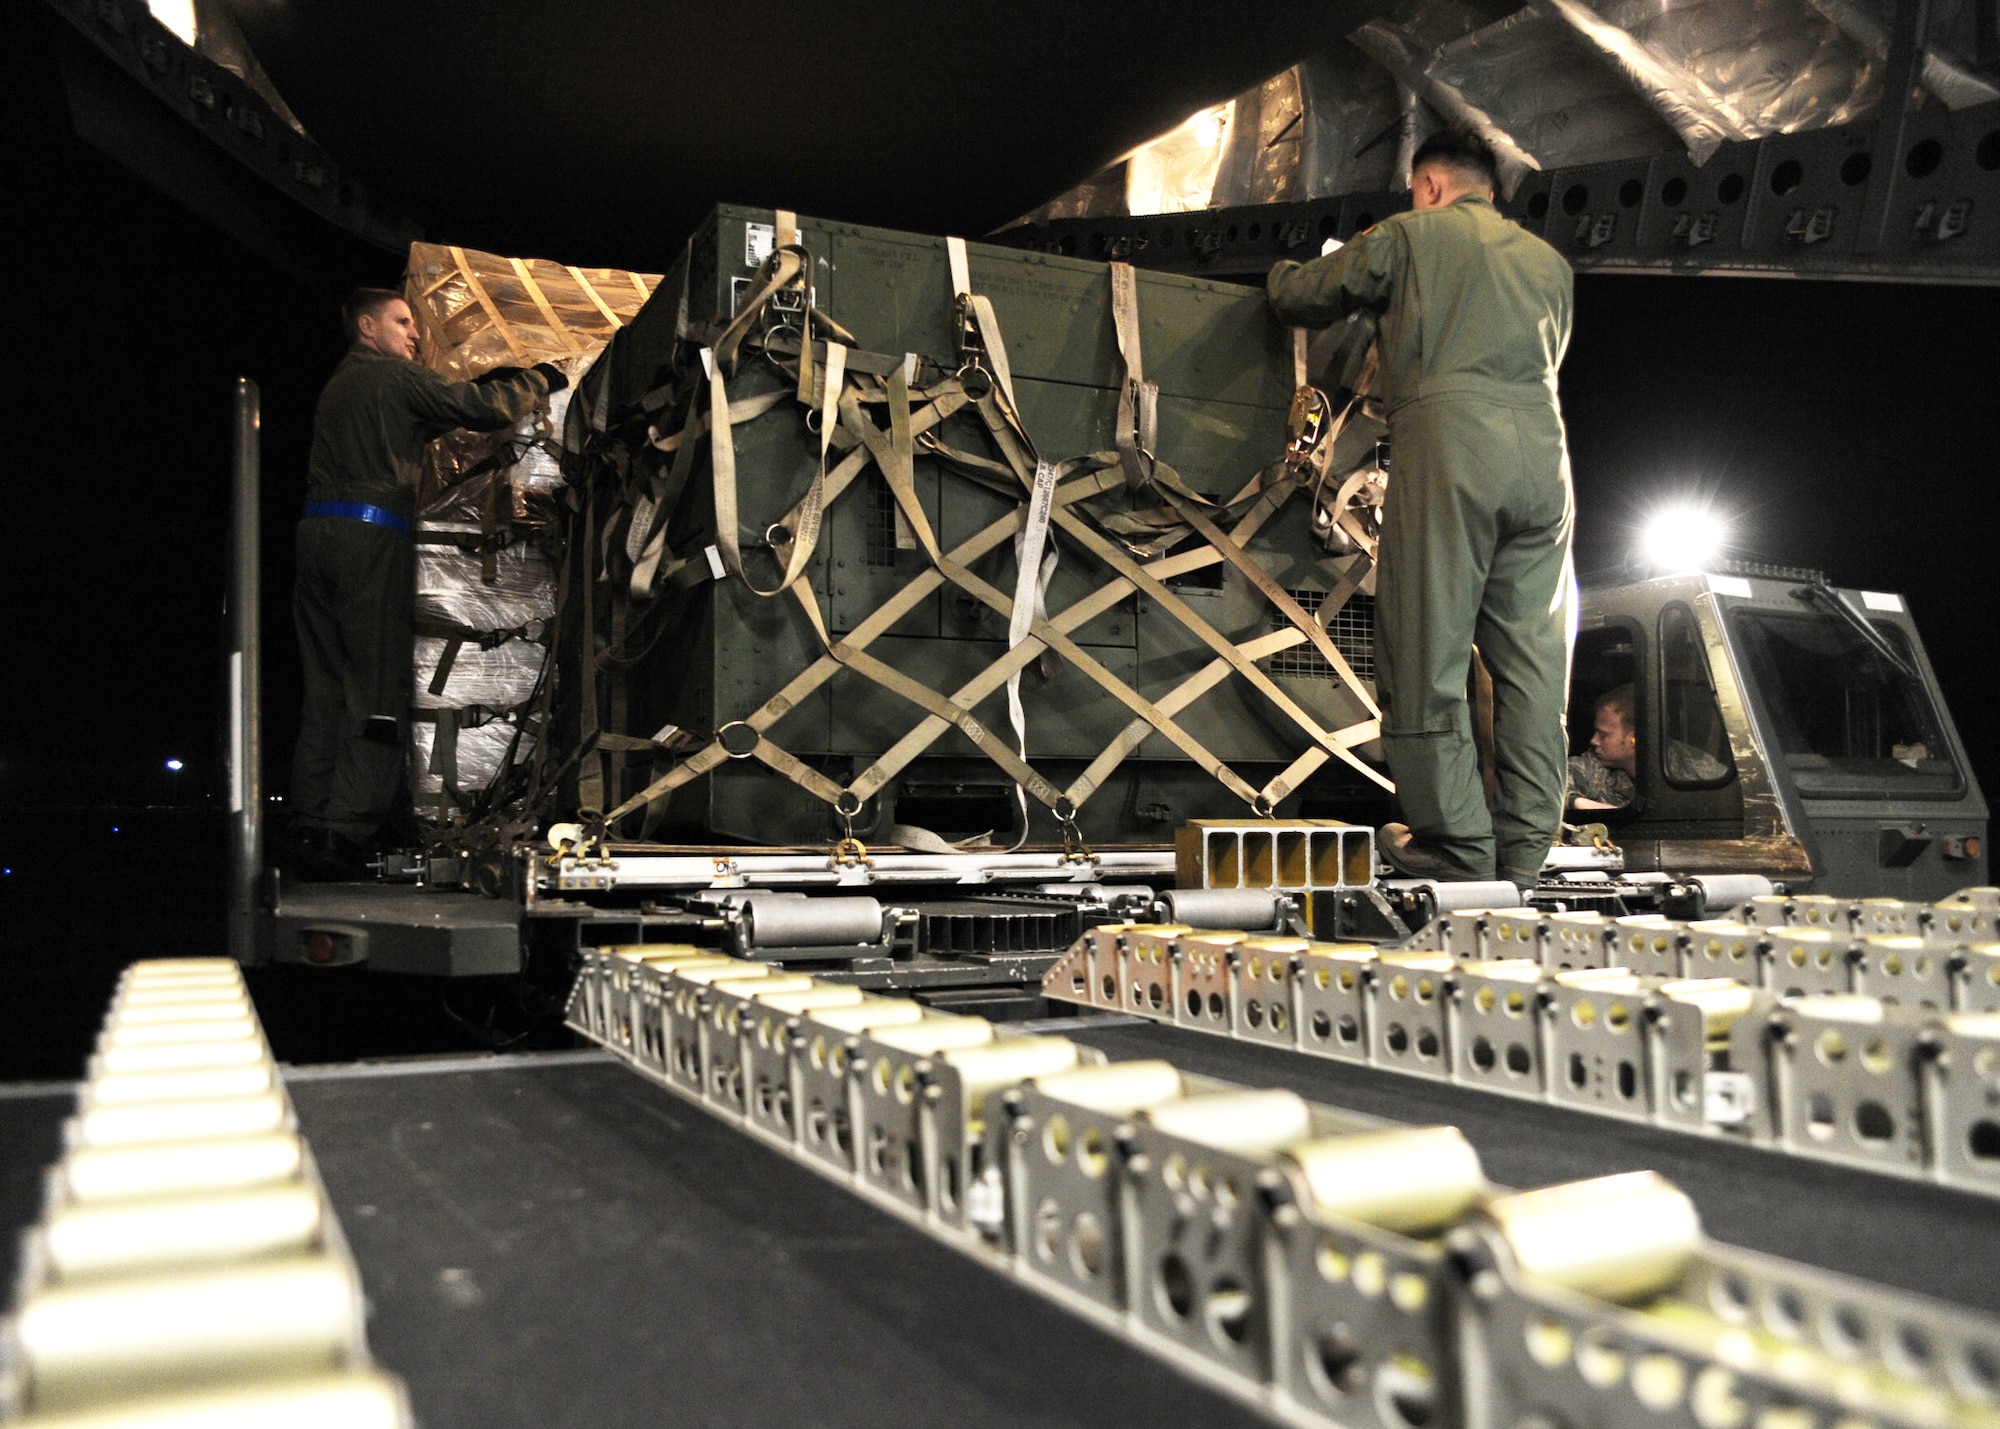 Equipment is loaded onto a C-17 Globemaster III at Joint Base McGuire-Dix-Lakehurst, N.J. Jan. 15, 2010, to be transported to Haiti. (U.S. Air Force photo/Senior Airman Katie Gieratz)